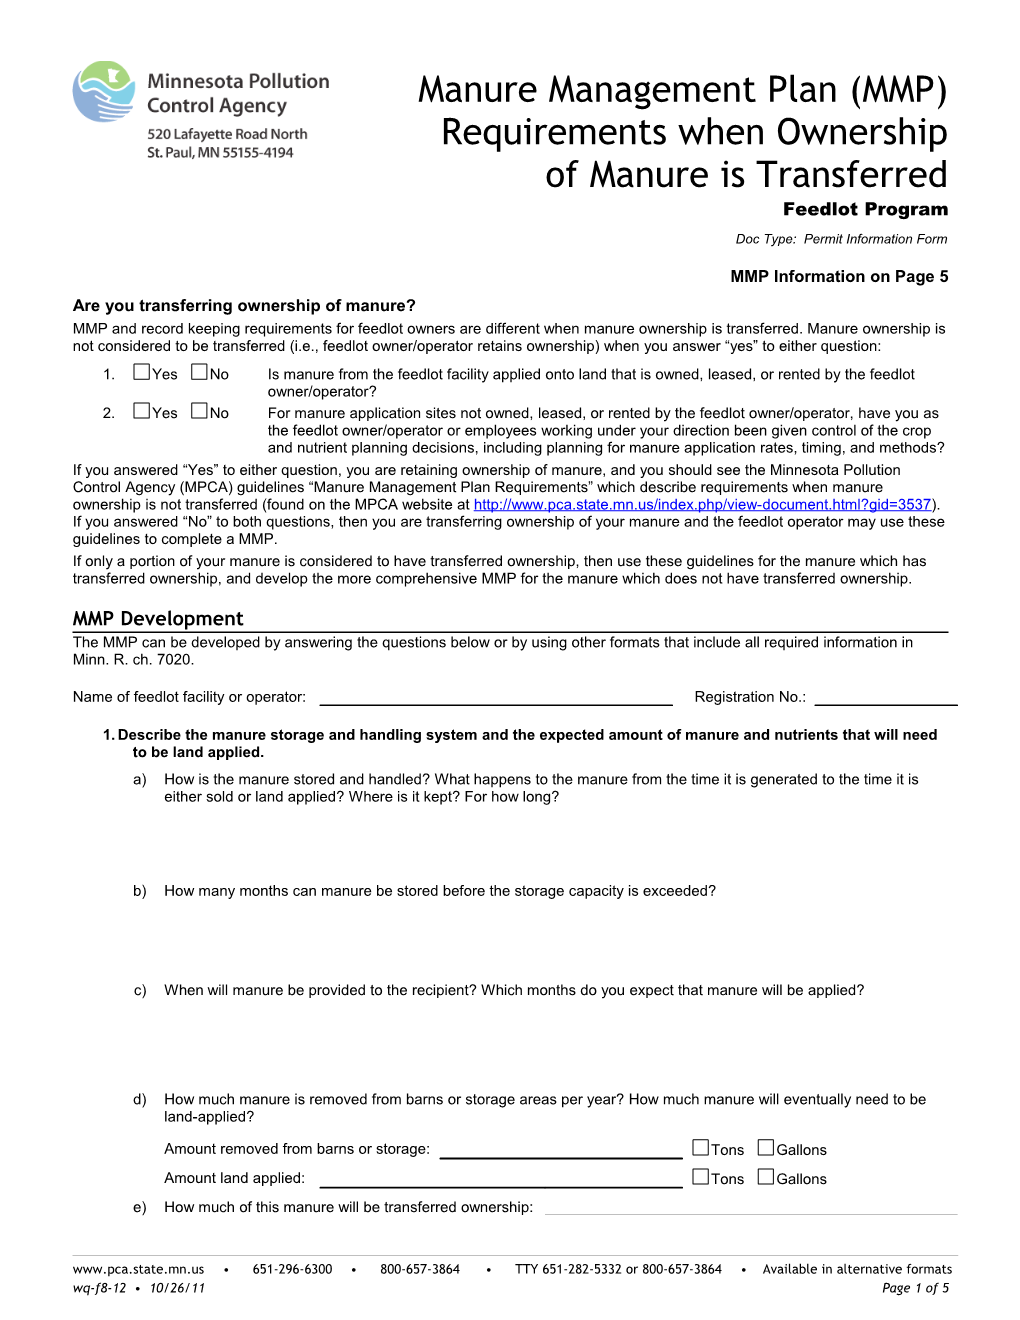 Manure Management Plan (MMP) Requirements When Ownership of Manure Is Transferred - Form